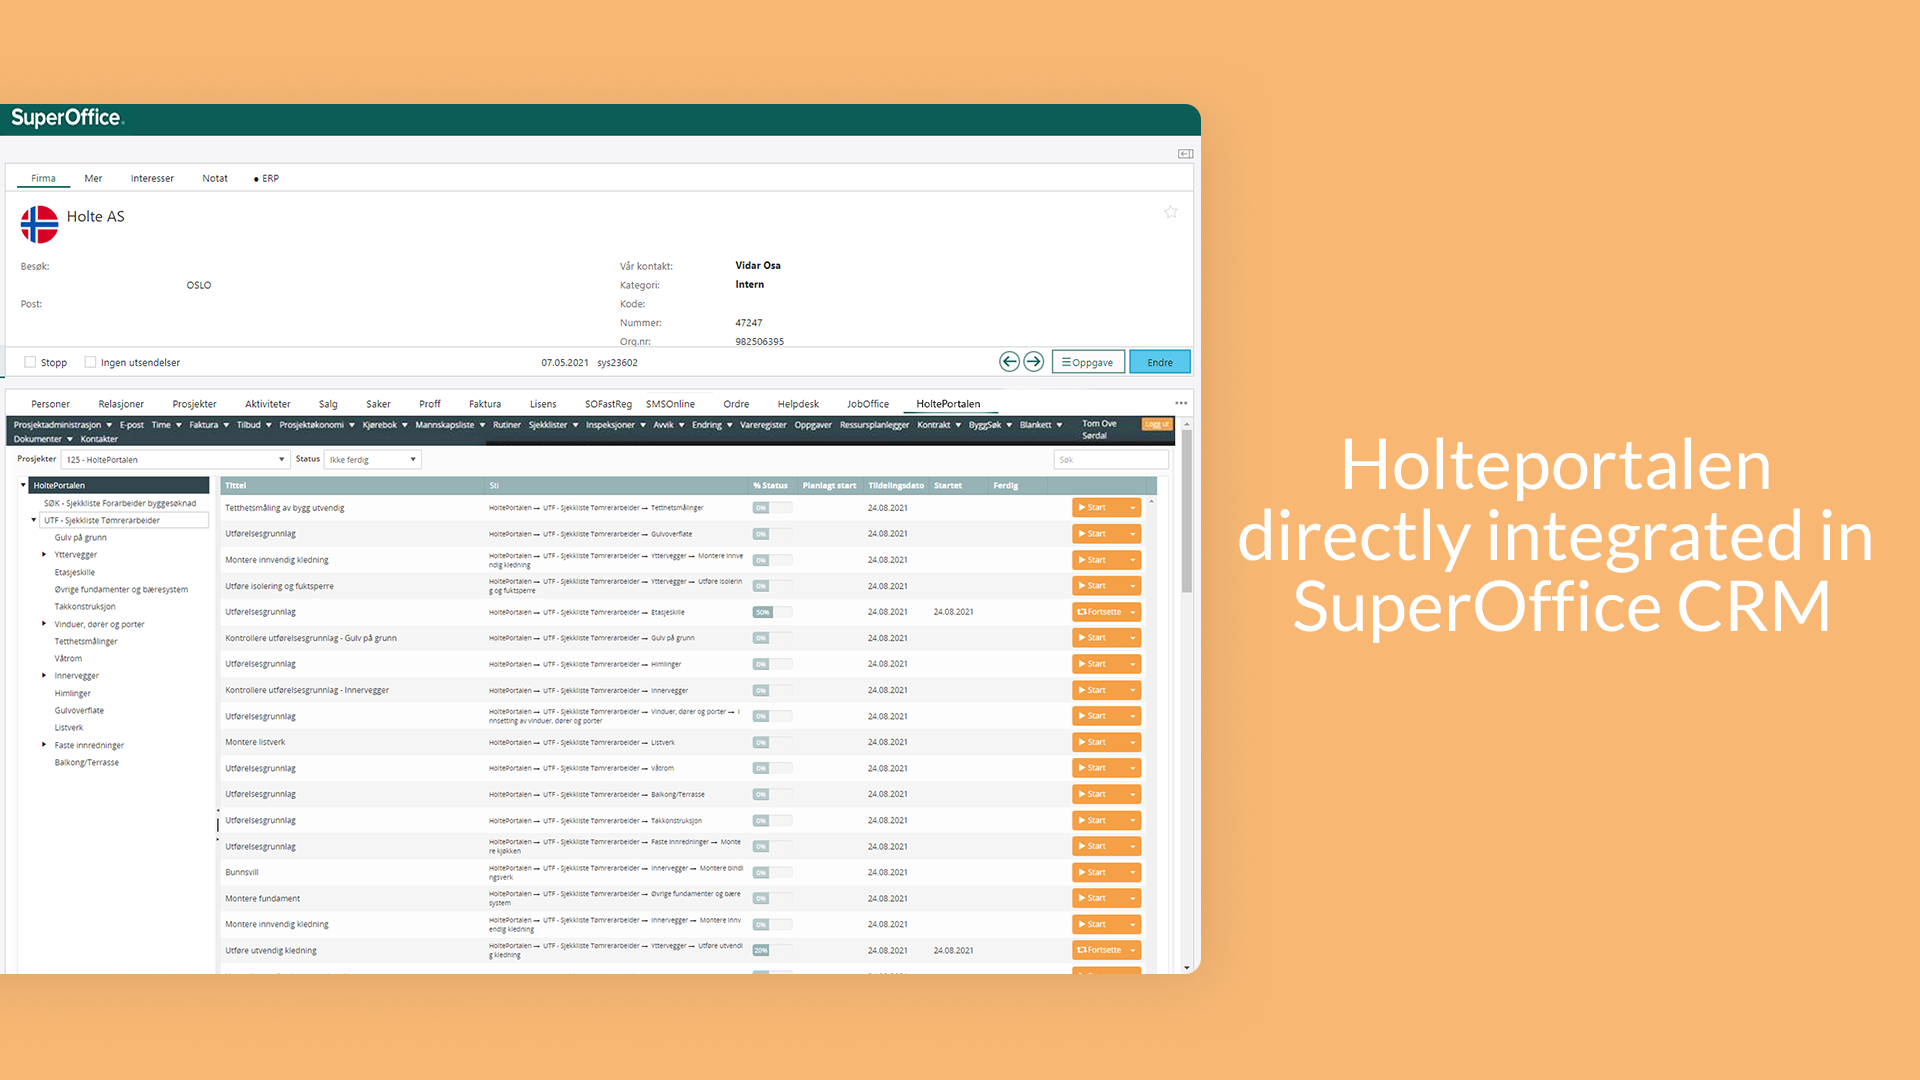 1 Holteportalen directly integrated in SuperOffice CRM.png